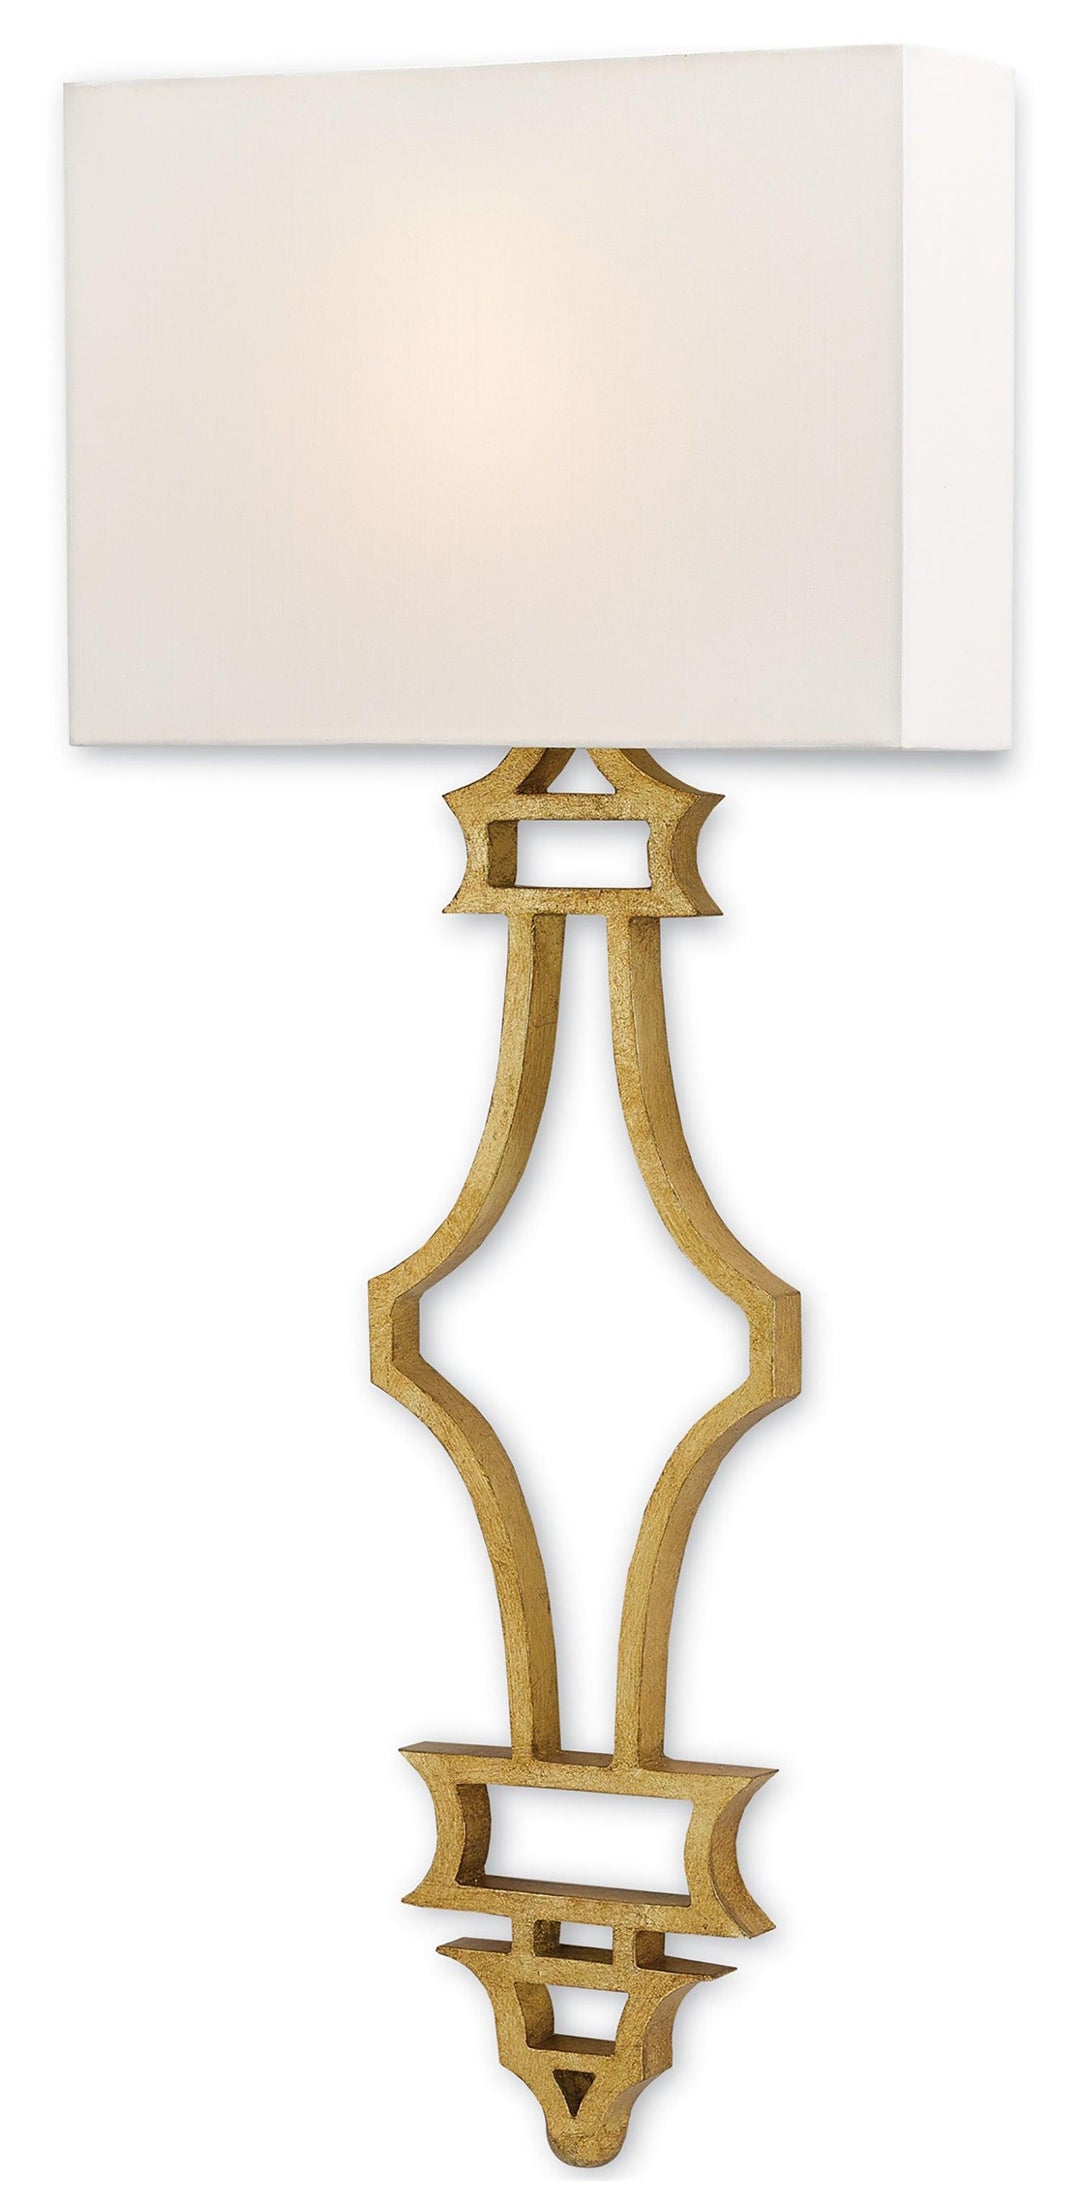 Eternity Gold Wall Sconce - Casey & Company